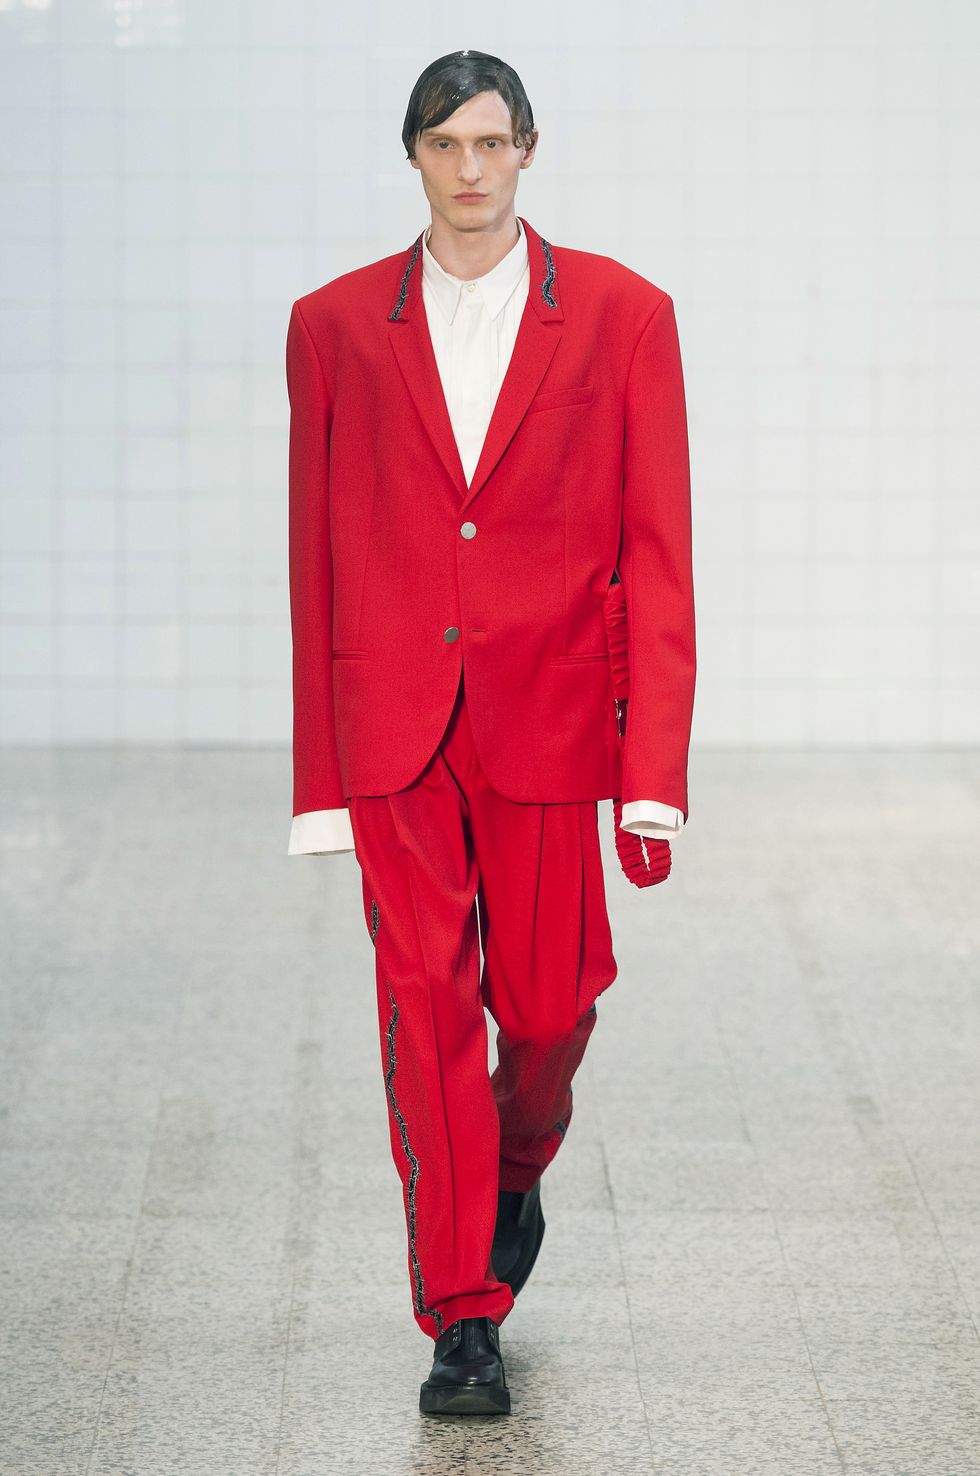 Runway, Suit, Fashion, Clothing, Red, Fashion show, Fashion model, Formal wear, Pantsuit, Outerwear, 